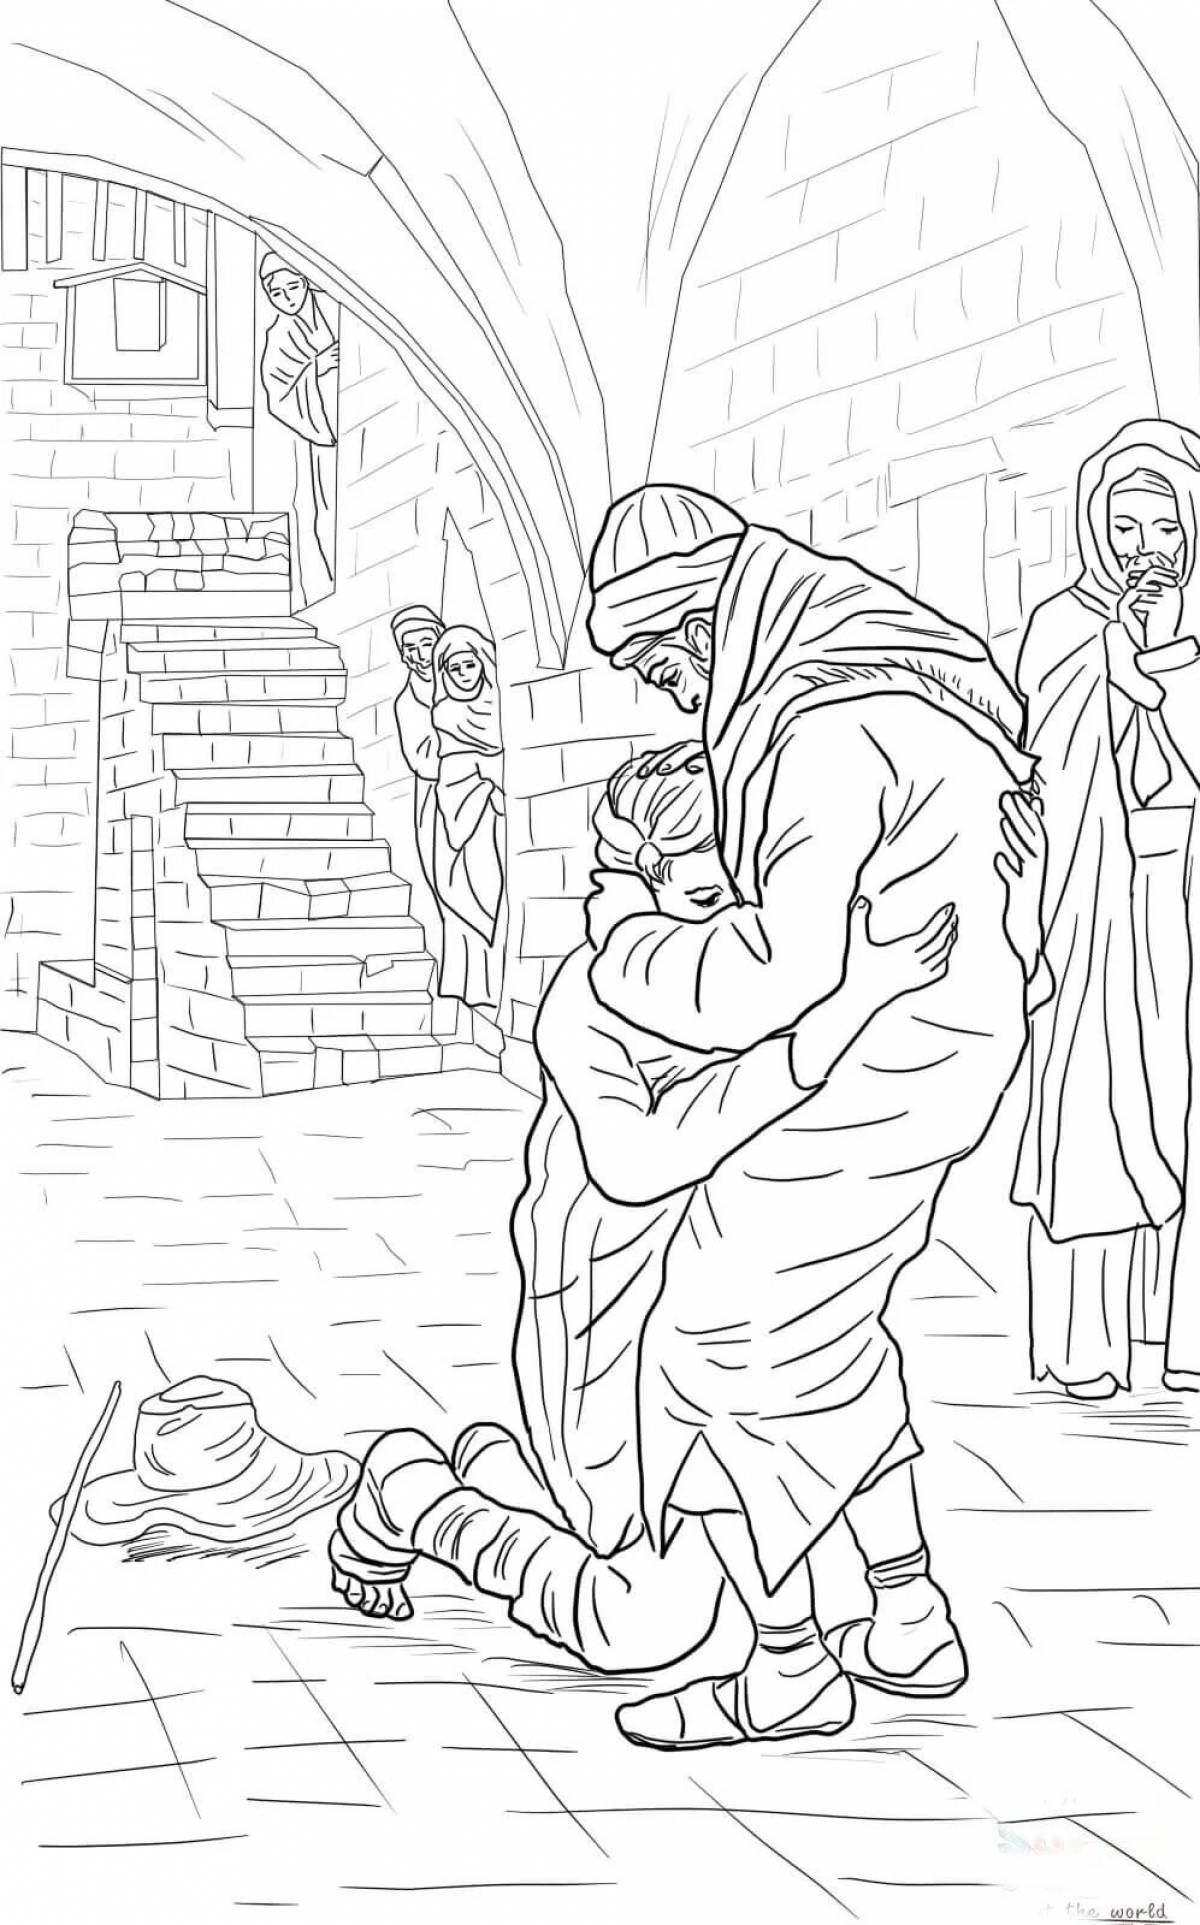 Coloring page of the week of the brilliant prodigal son